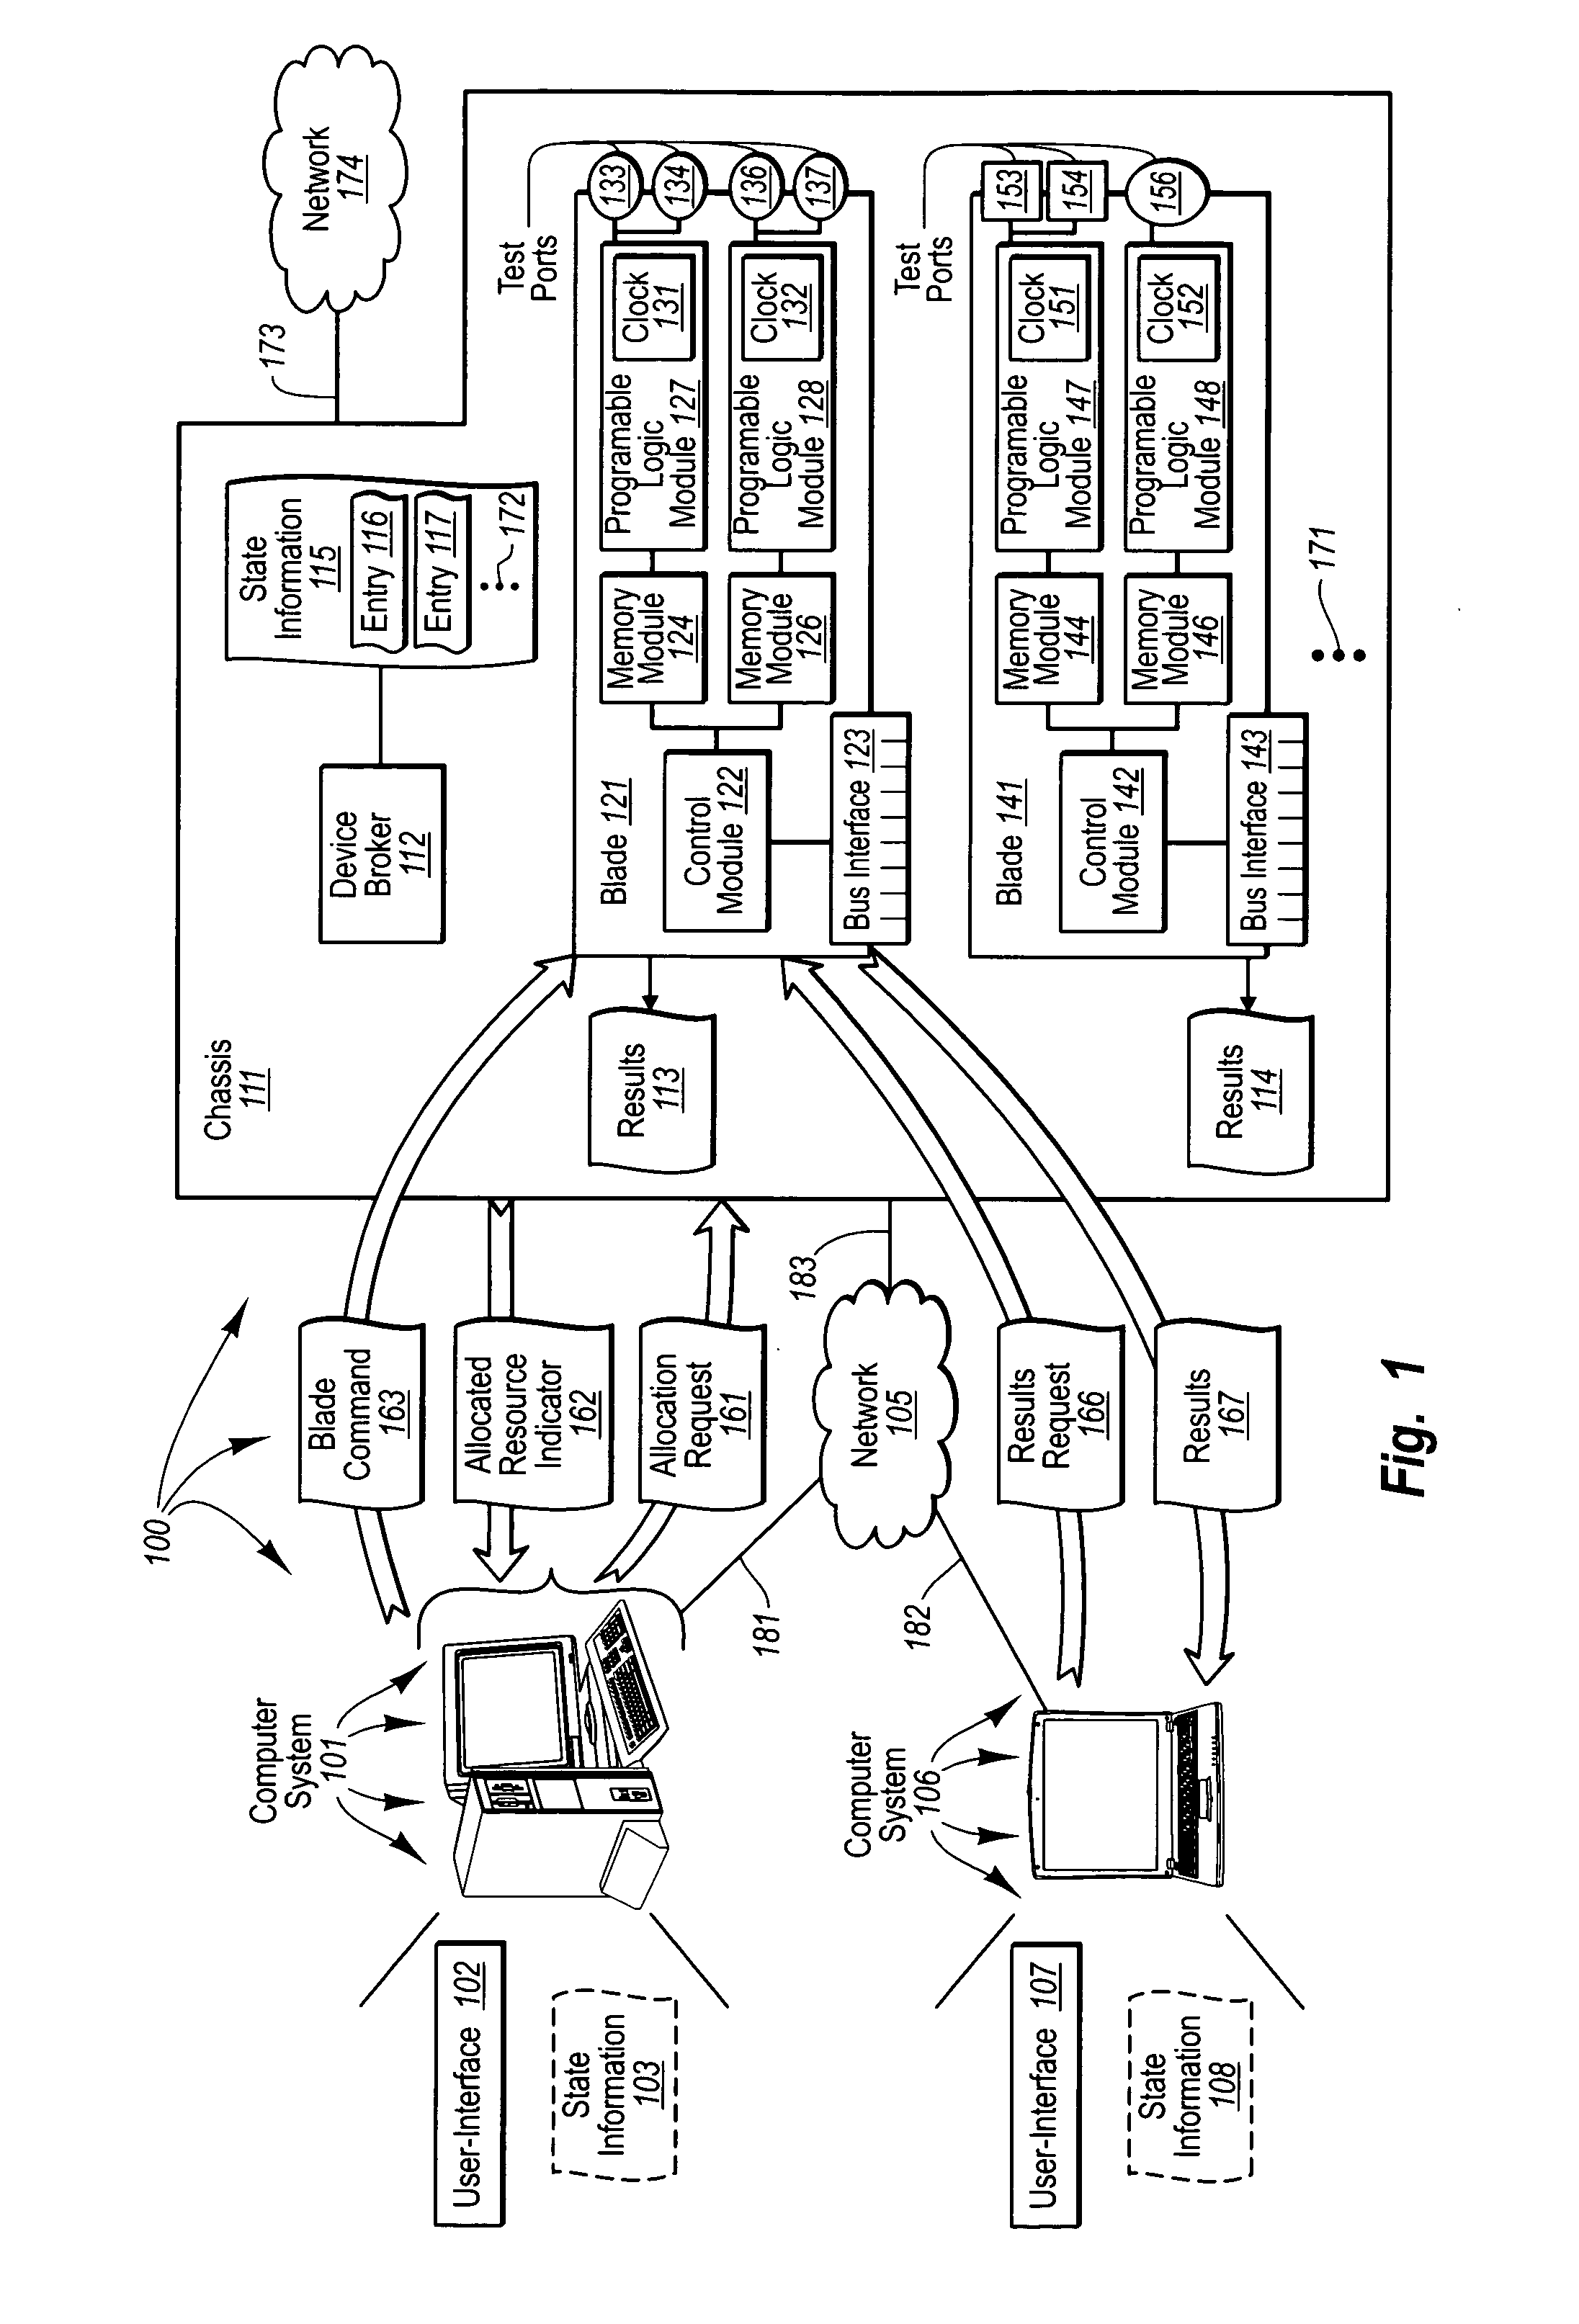 Accessing results of network diagnostic functions in a distributed system